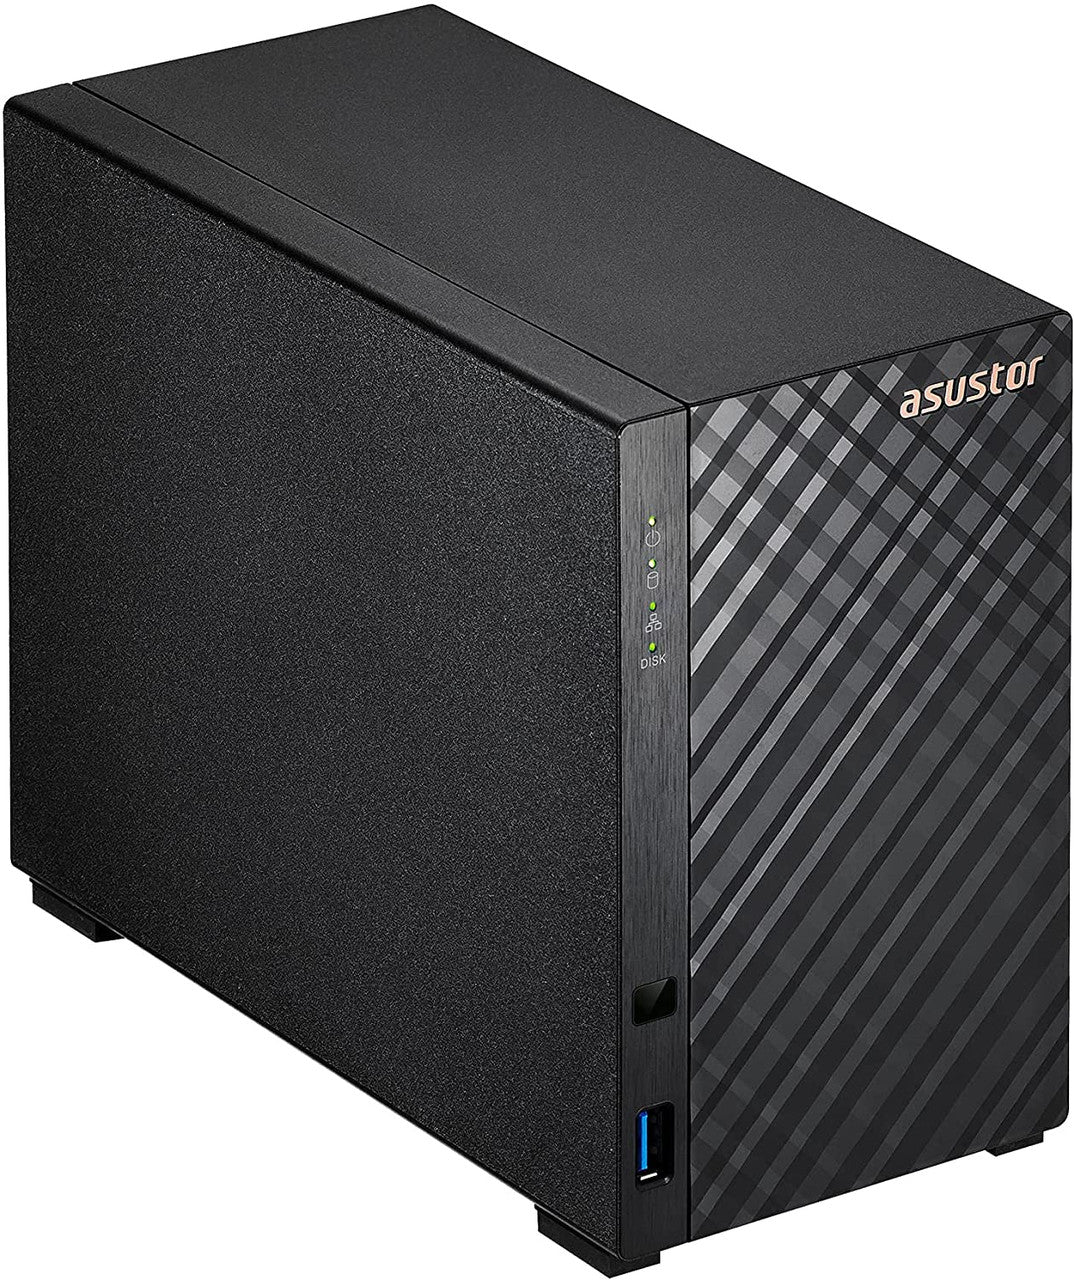 Asustor AS1102T 2-Bay Drivestor 2 NAS with 1GB RAM and 28TB (2x14TB) Western Digital RED Plus Drives